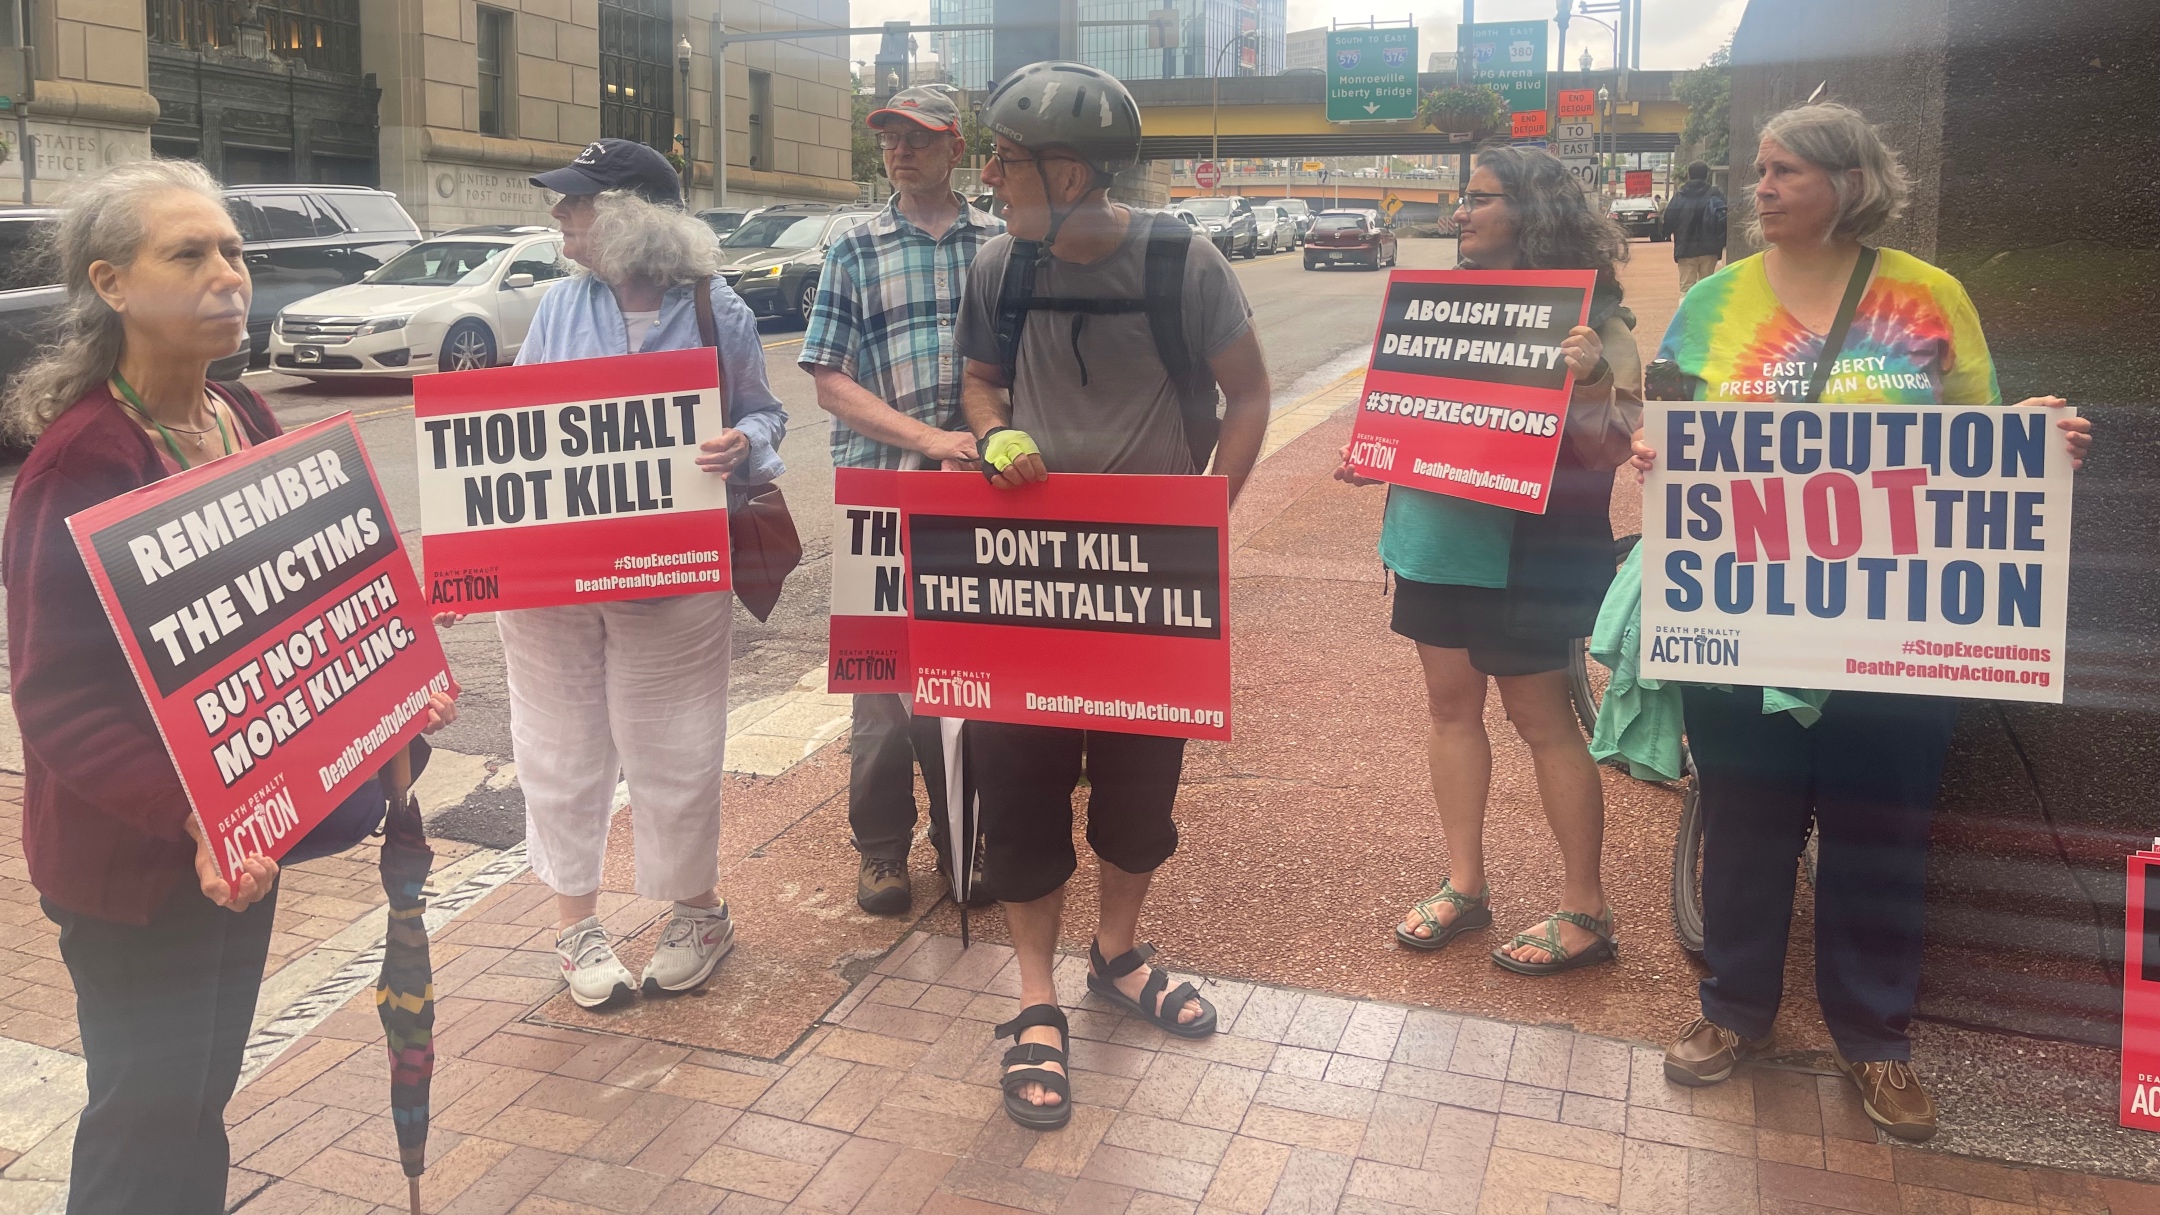 A group calling itself Jews Against the Death Penalty protests outside the courthouse 